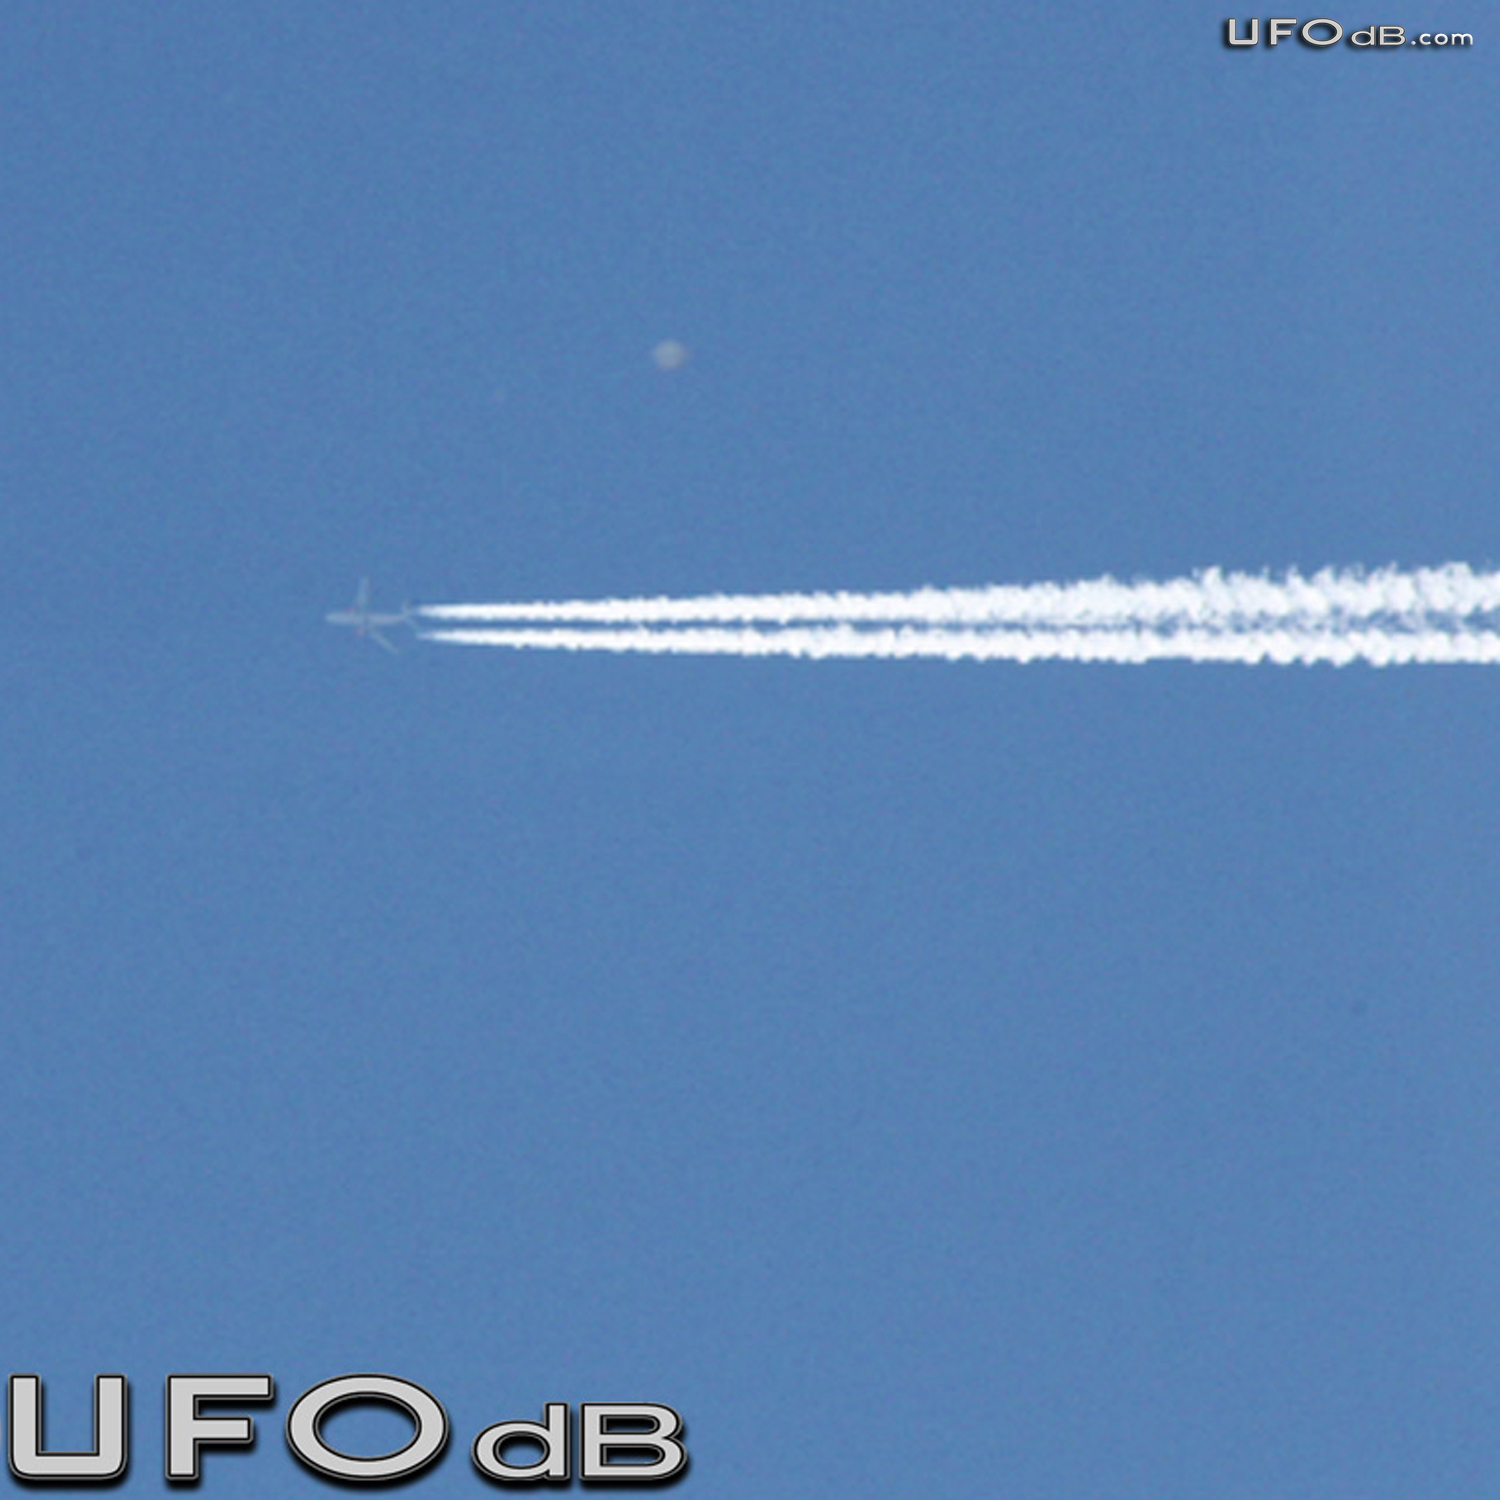 High Altitude UFO near airplane caught on picture Norwich UK May 2011 UFO Picture #309-2